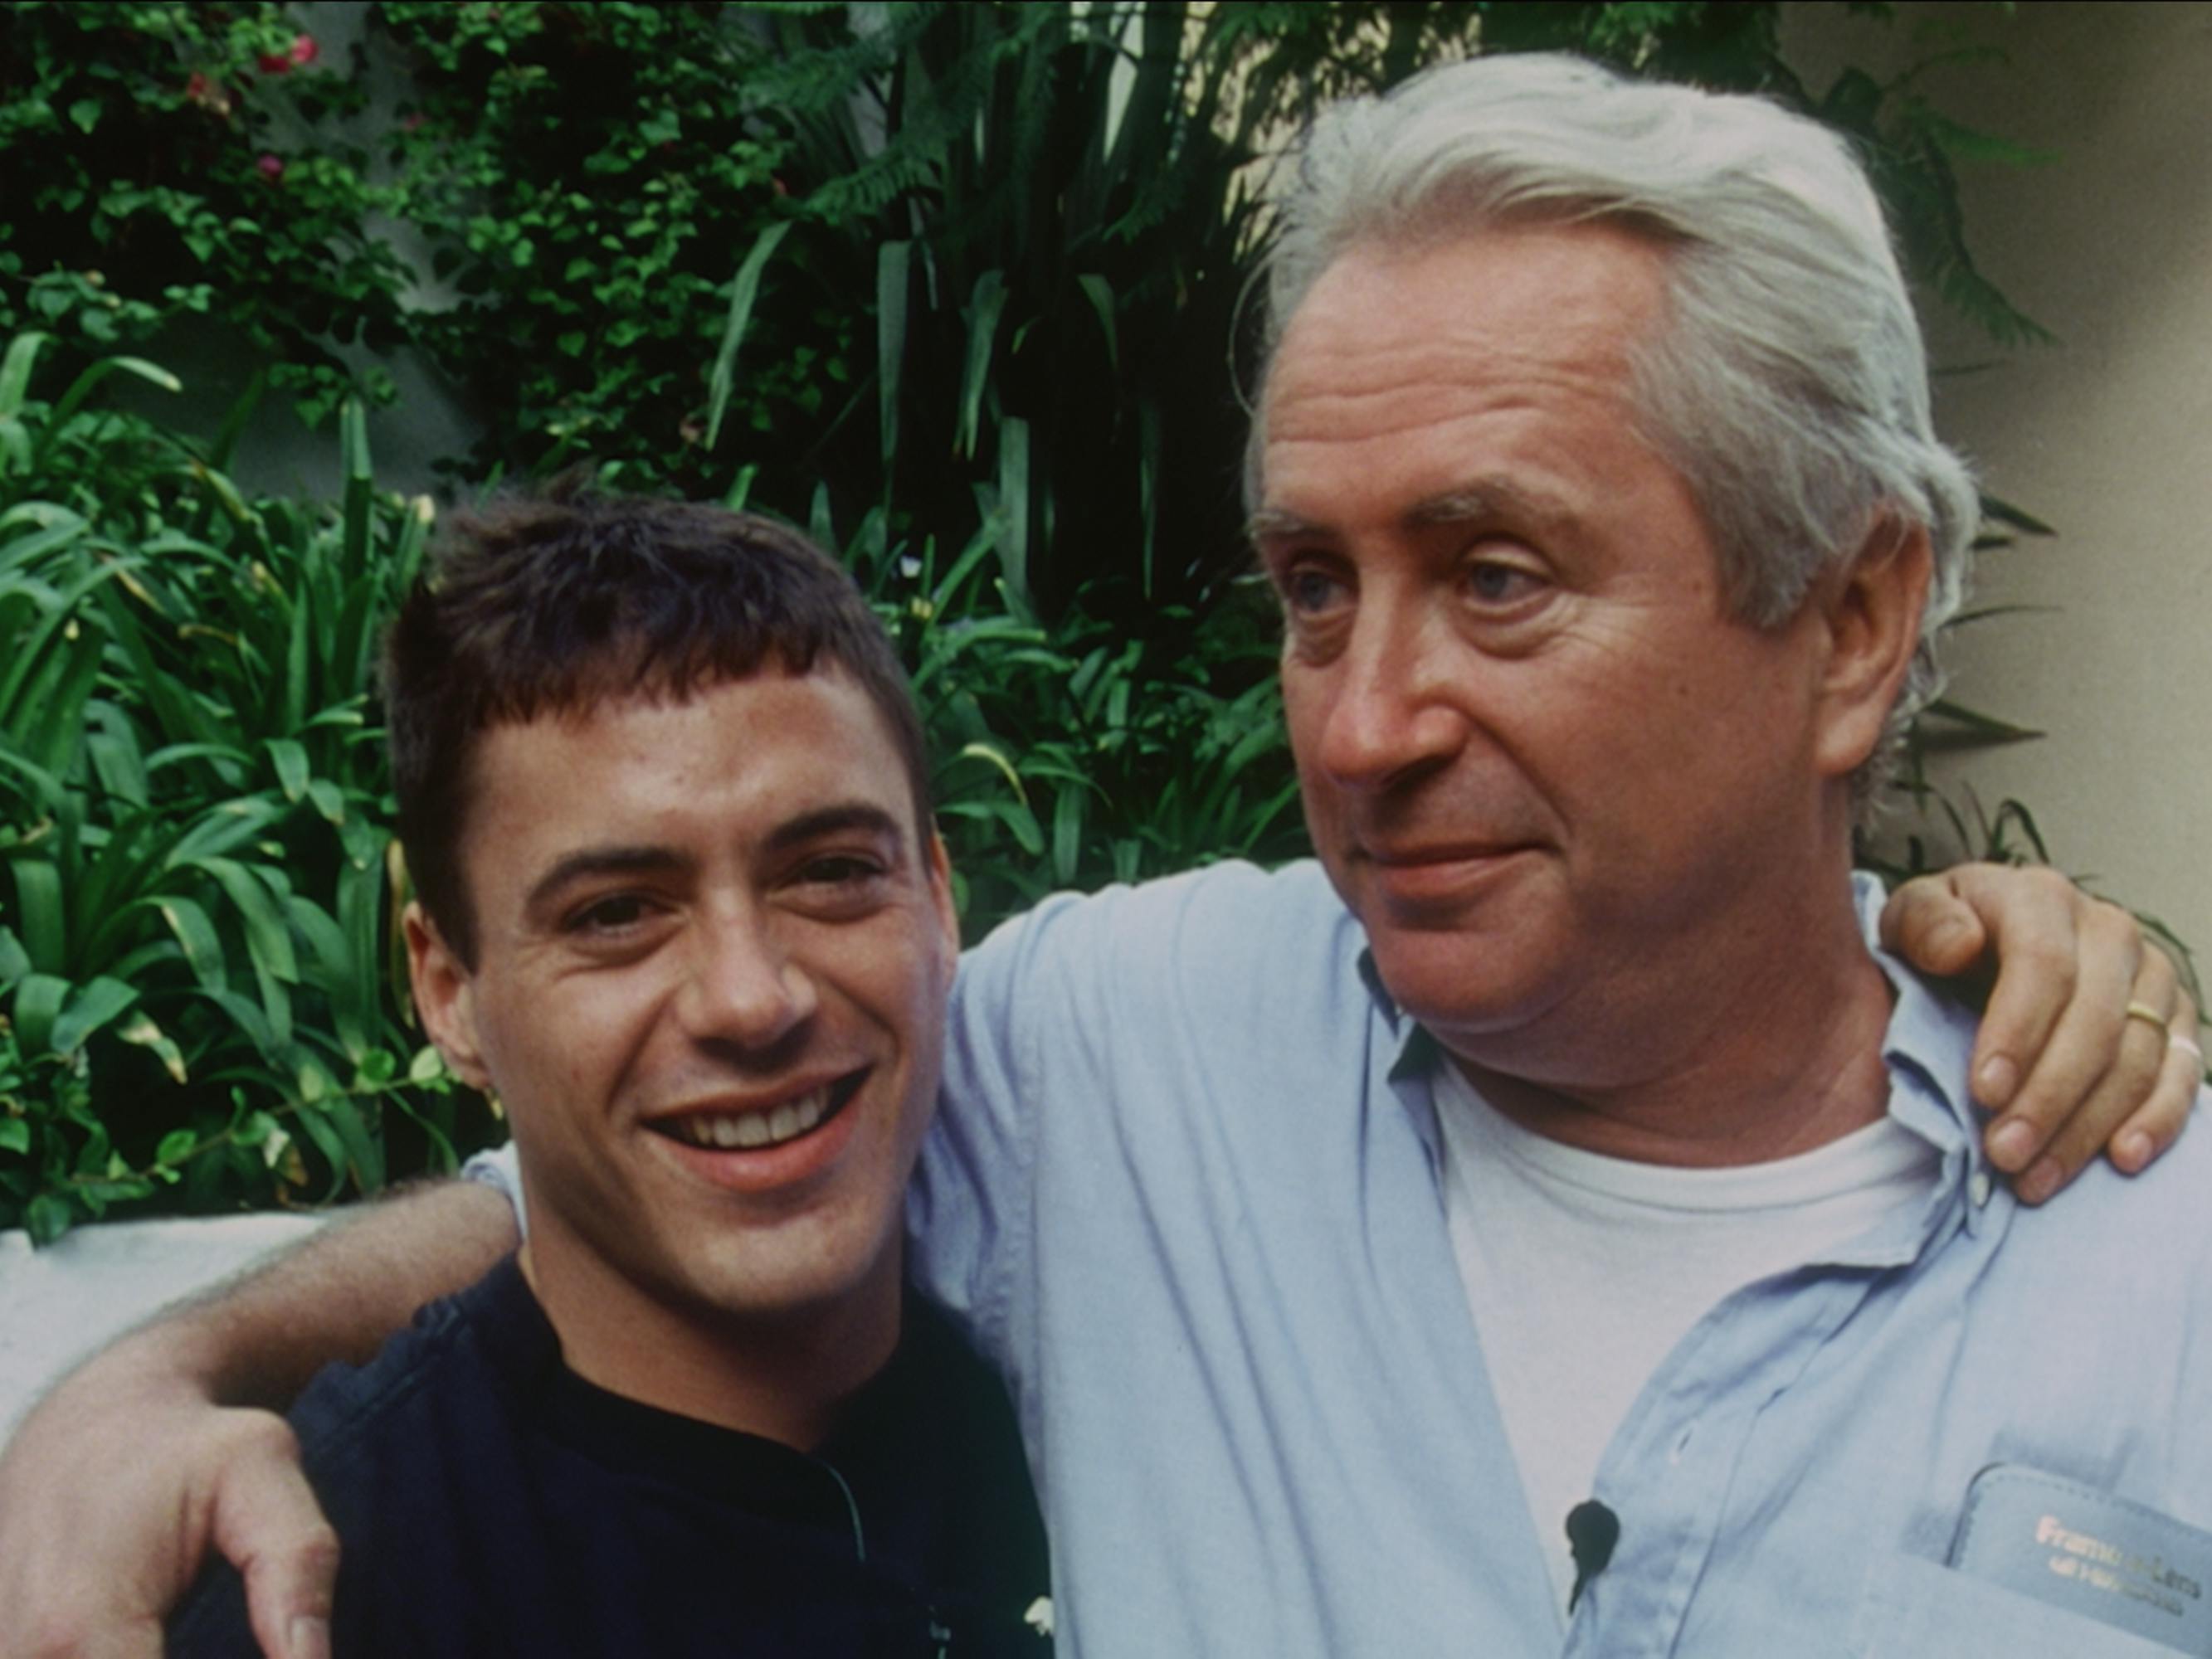 A young Robert Downey Jr. stands with his arm around Robert Downey Sr. The former wears a black t-shirt and the latter wears a chambray buttoned-down.